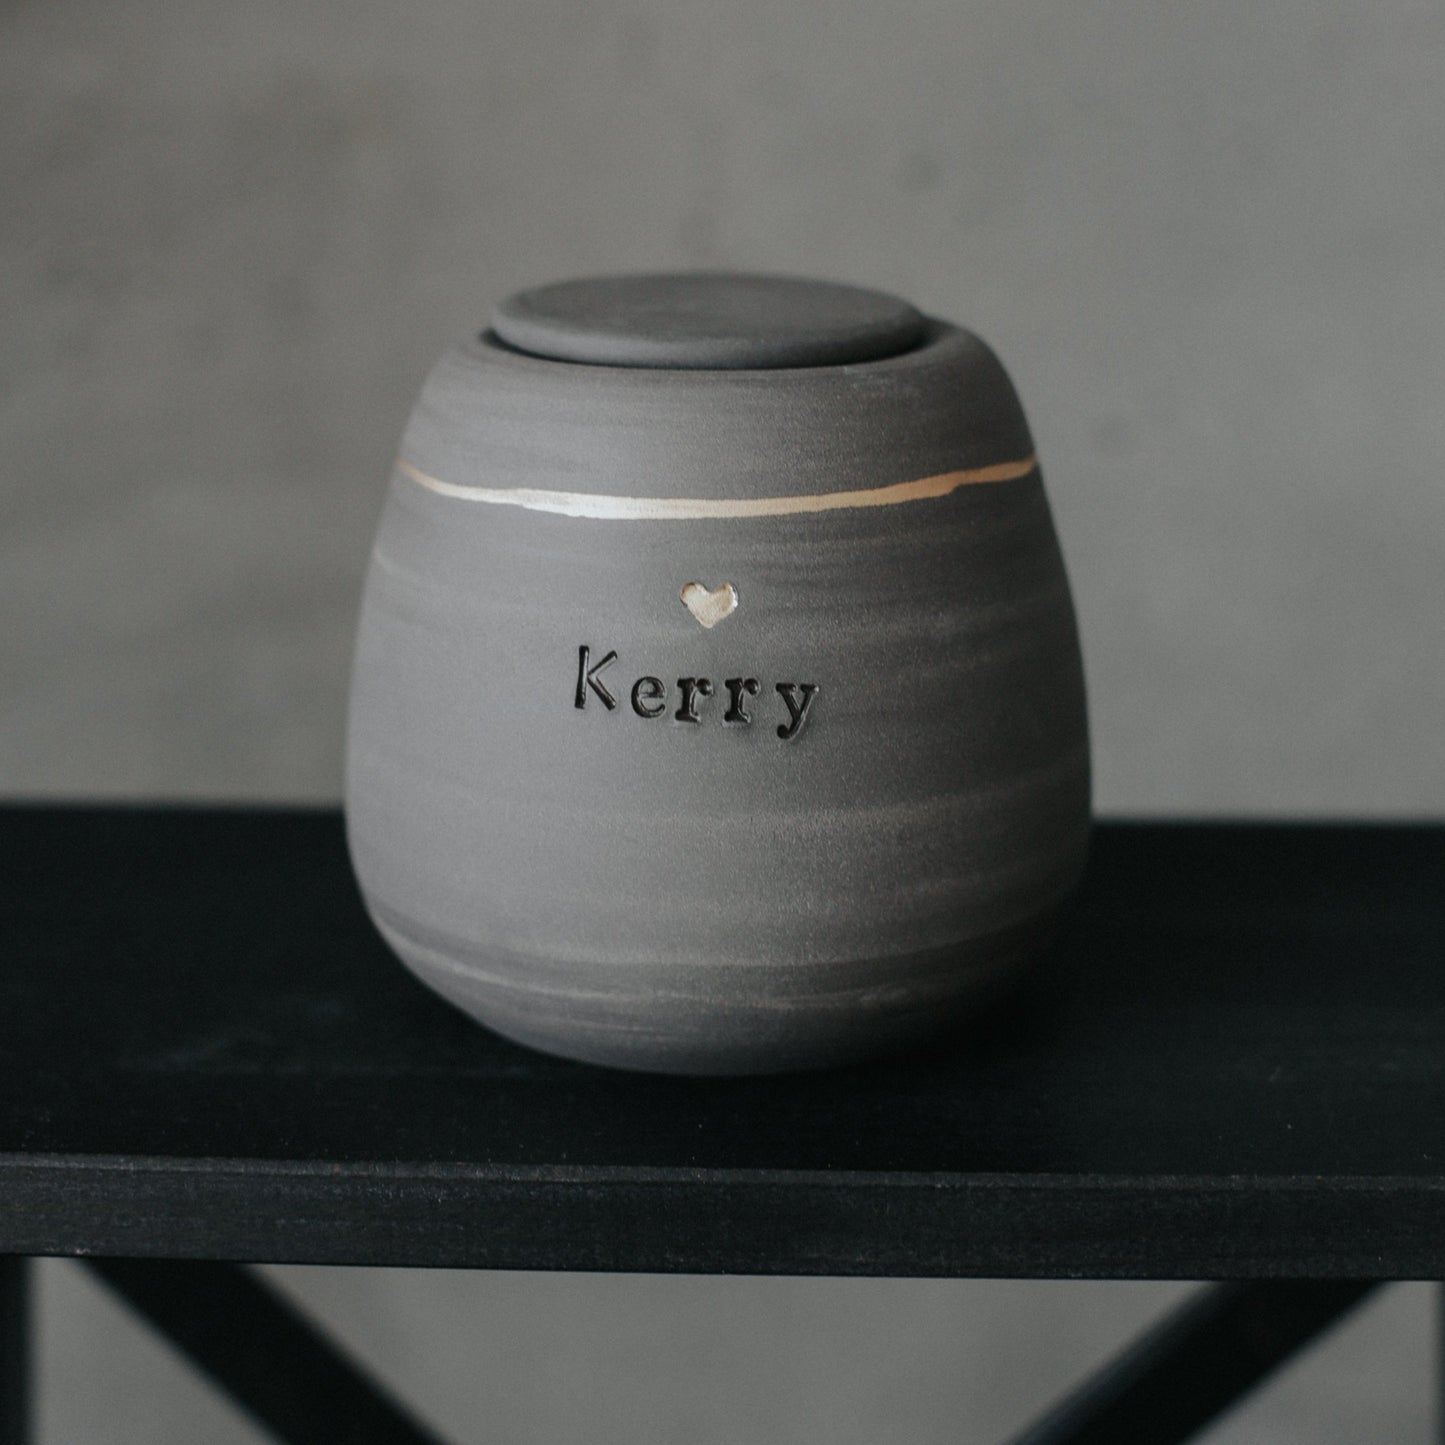 Customized Ceramic Dog Urn - Gray Stoneware - Gold Heart Stamp - Personalized with "Kerry"